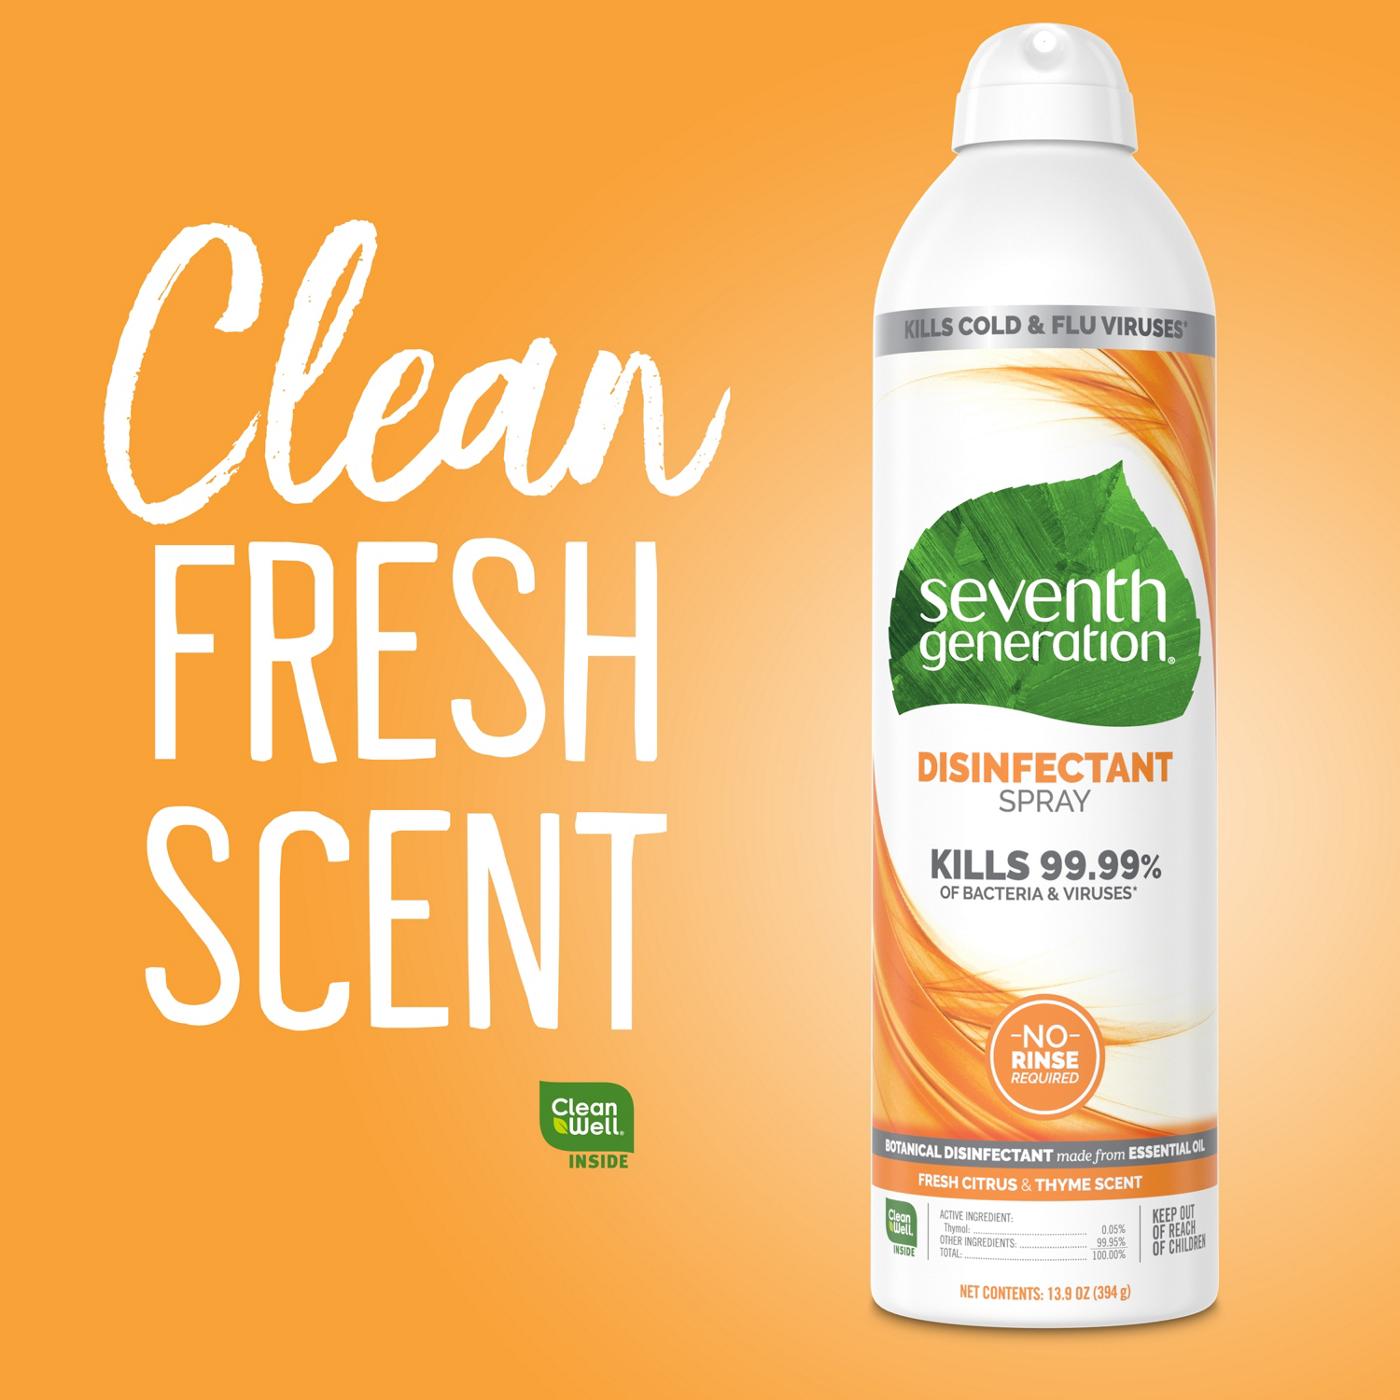 Seventh Generation Fresh Citrus and Thyme Disinfectant Spray; image 7 of 10